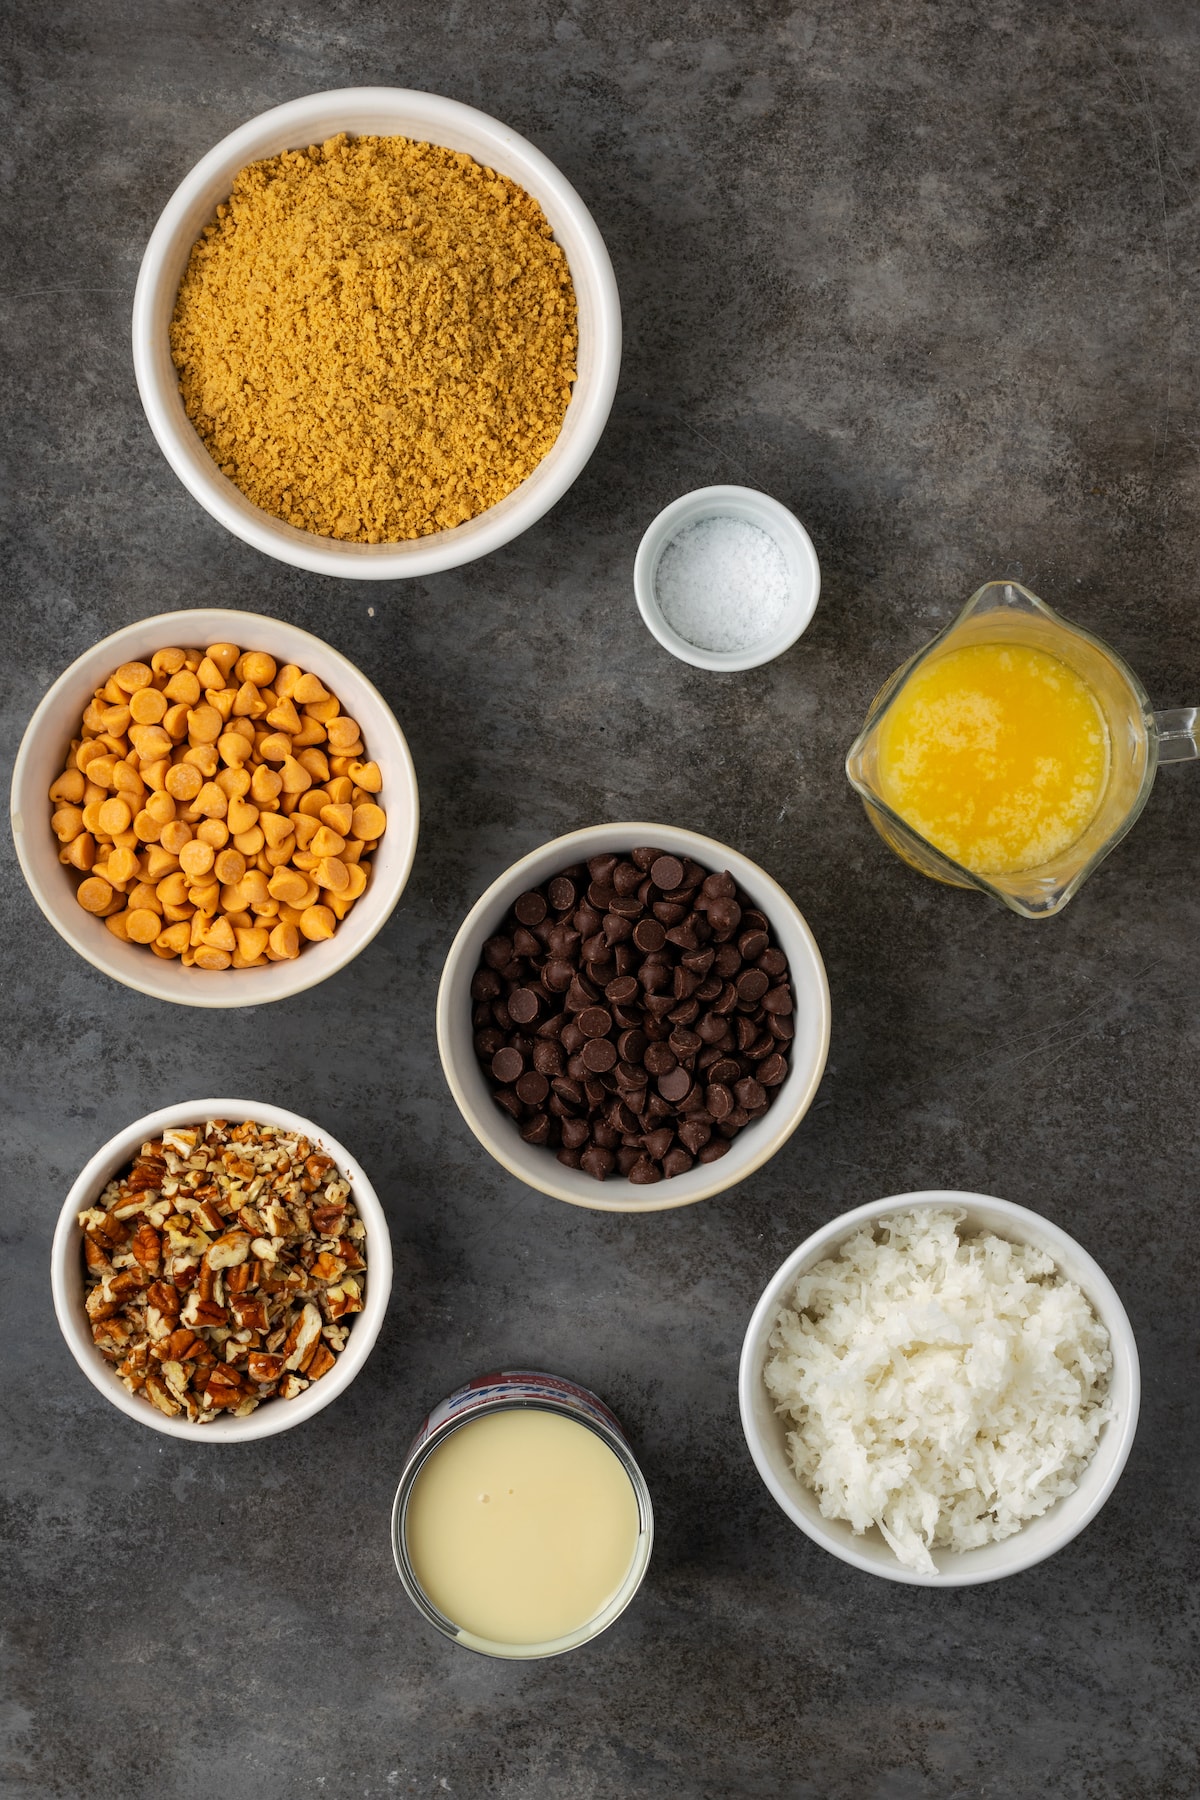 Ingredients for 7-layer magic bars.